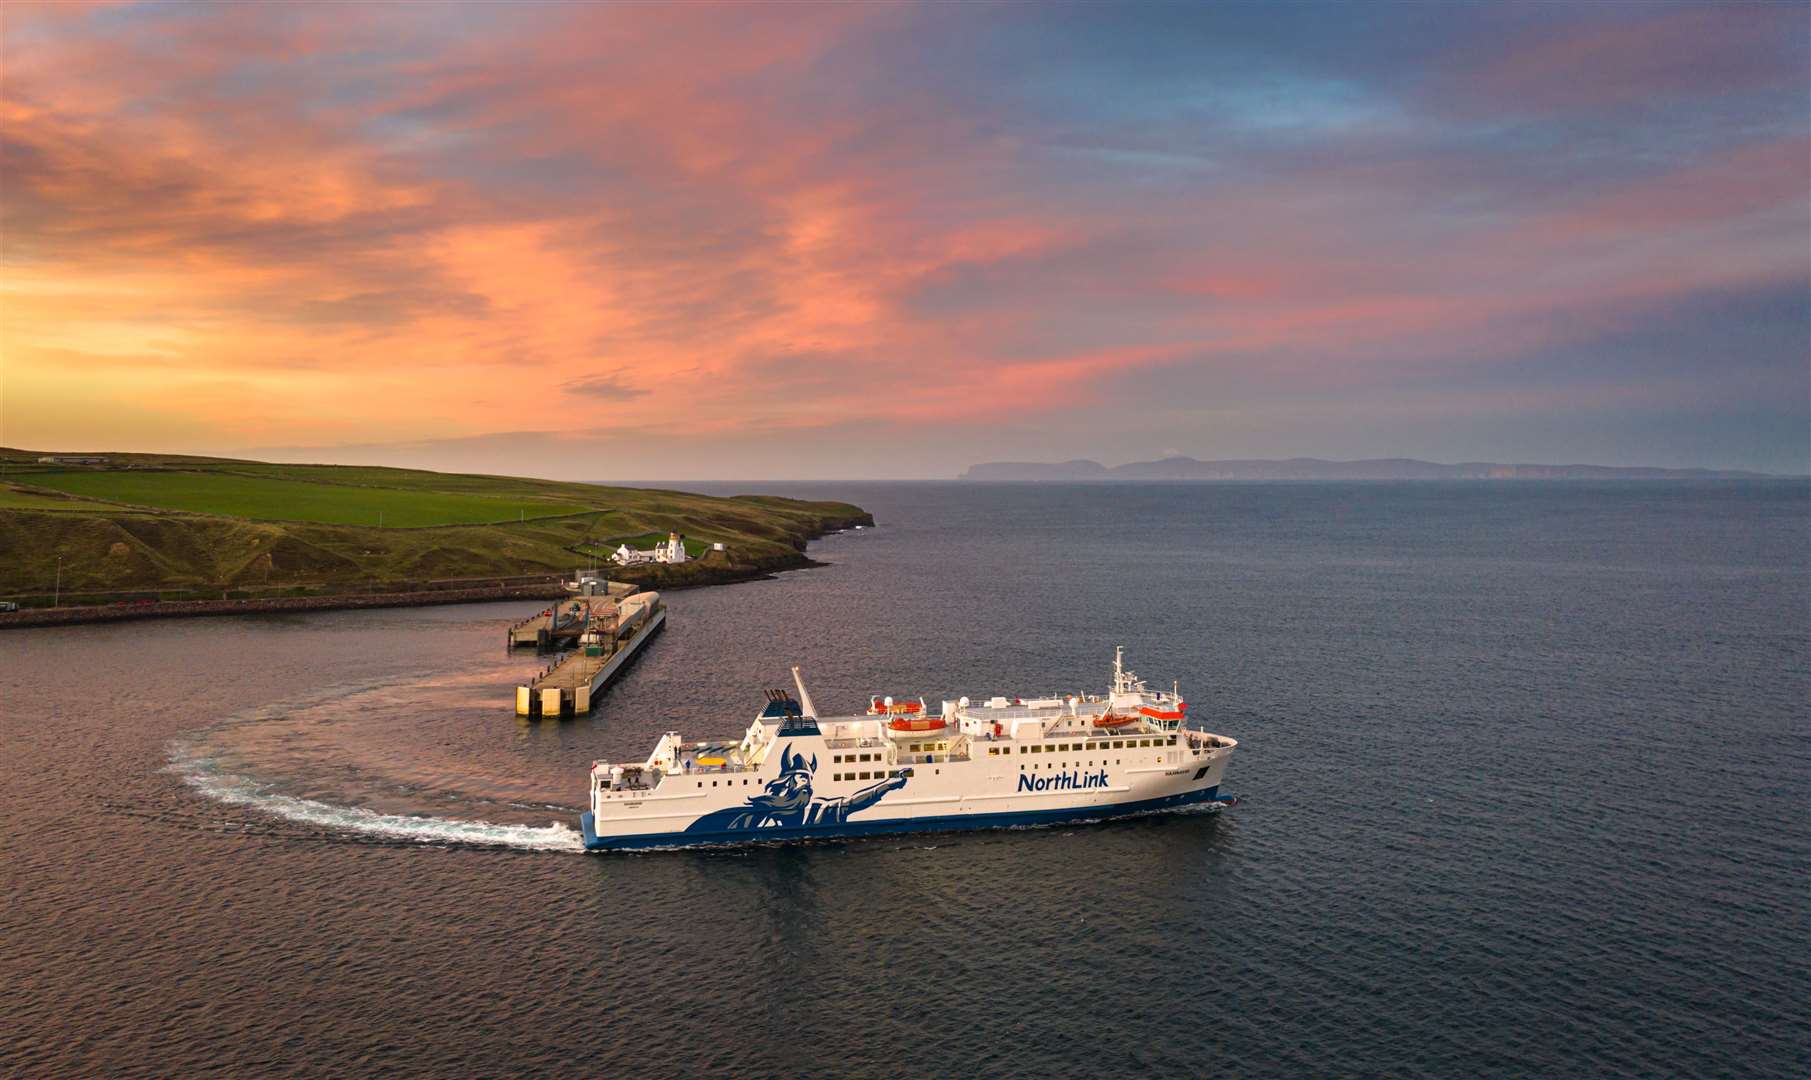 NorthLink Ferries' Hamnavoe vessel leaves the port at Scrabster, where it is 'plugged in' overnight. Picture: Serco NorthLink Ferries